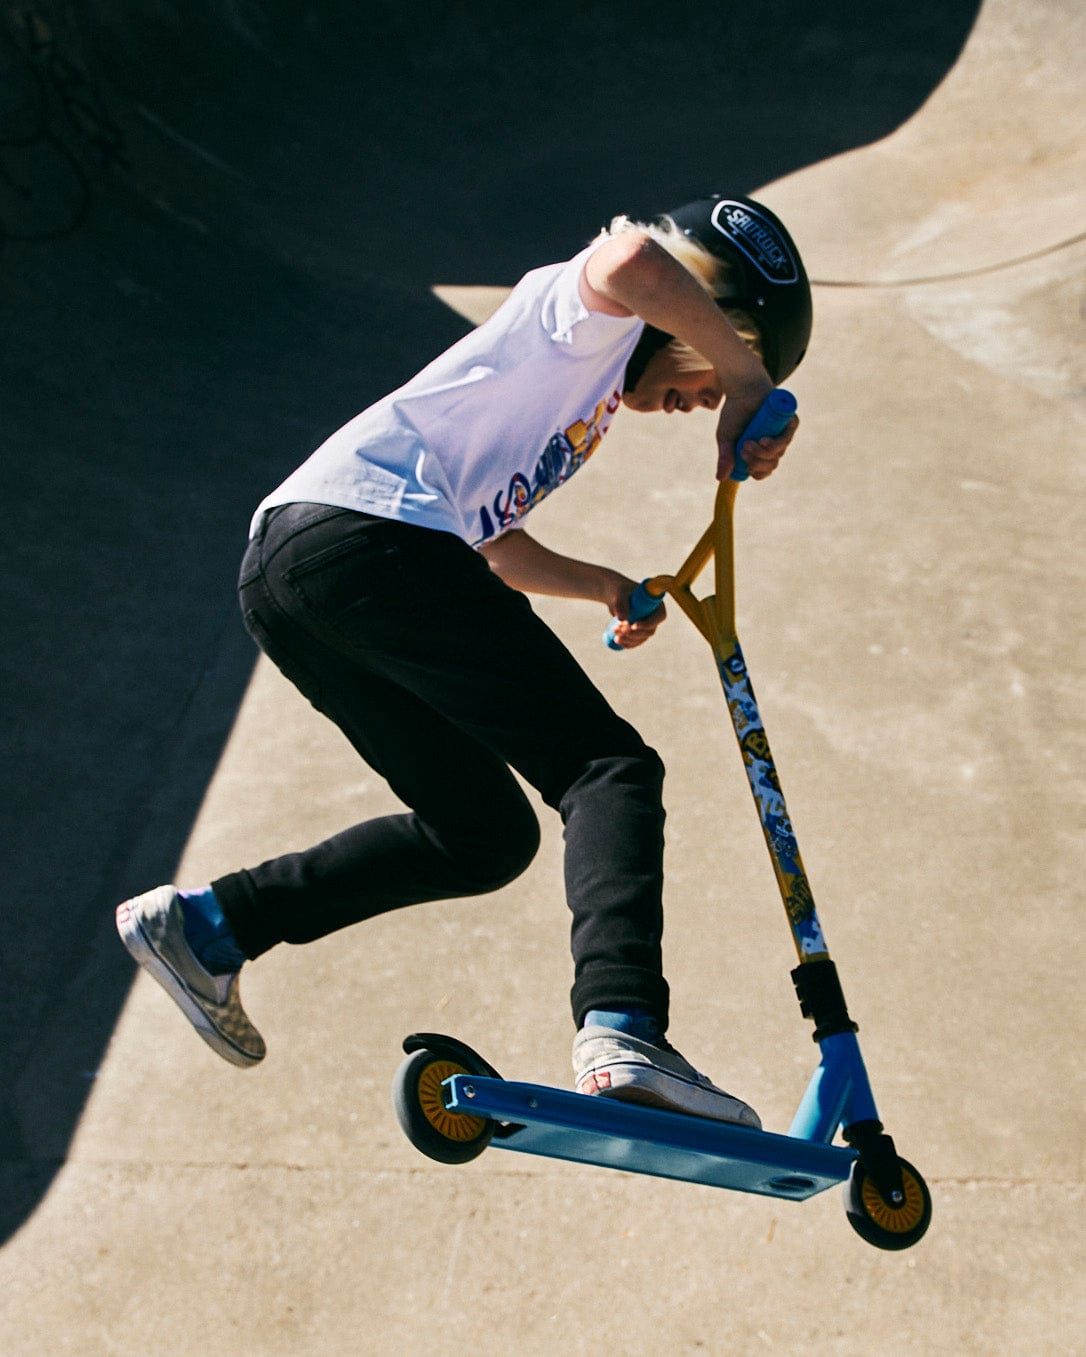 A person riding a Saltrock Warped - Stunt Scooter - Blue in a skate park.